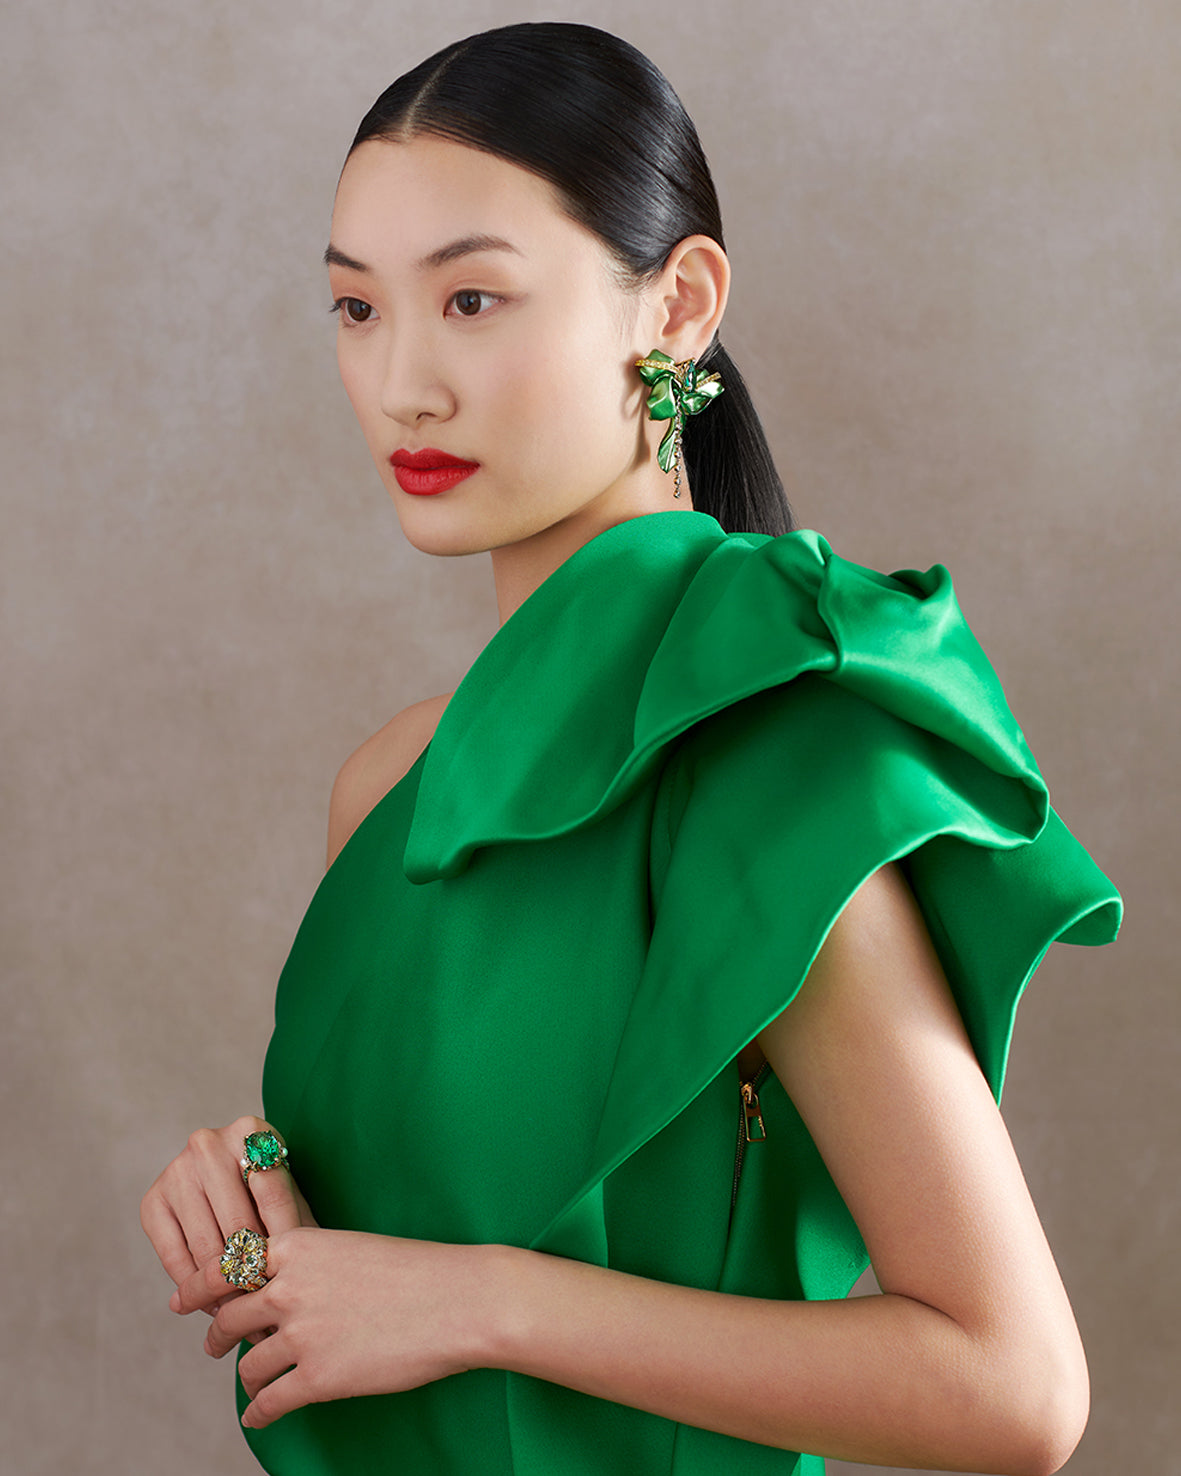 Anabela Chan Joaillerie_Emerald Cupid's Bow Earrings, Emerald Pave Pannetone & Tourmaline Mermaid Rings_Model Campaign Shot